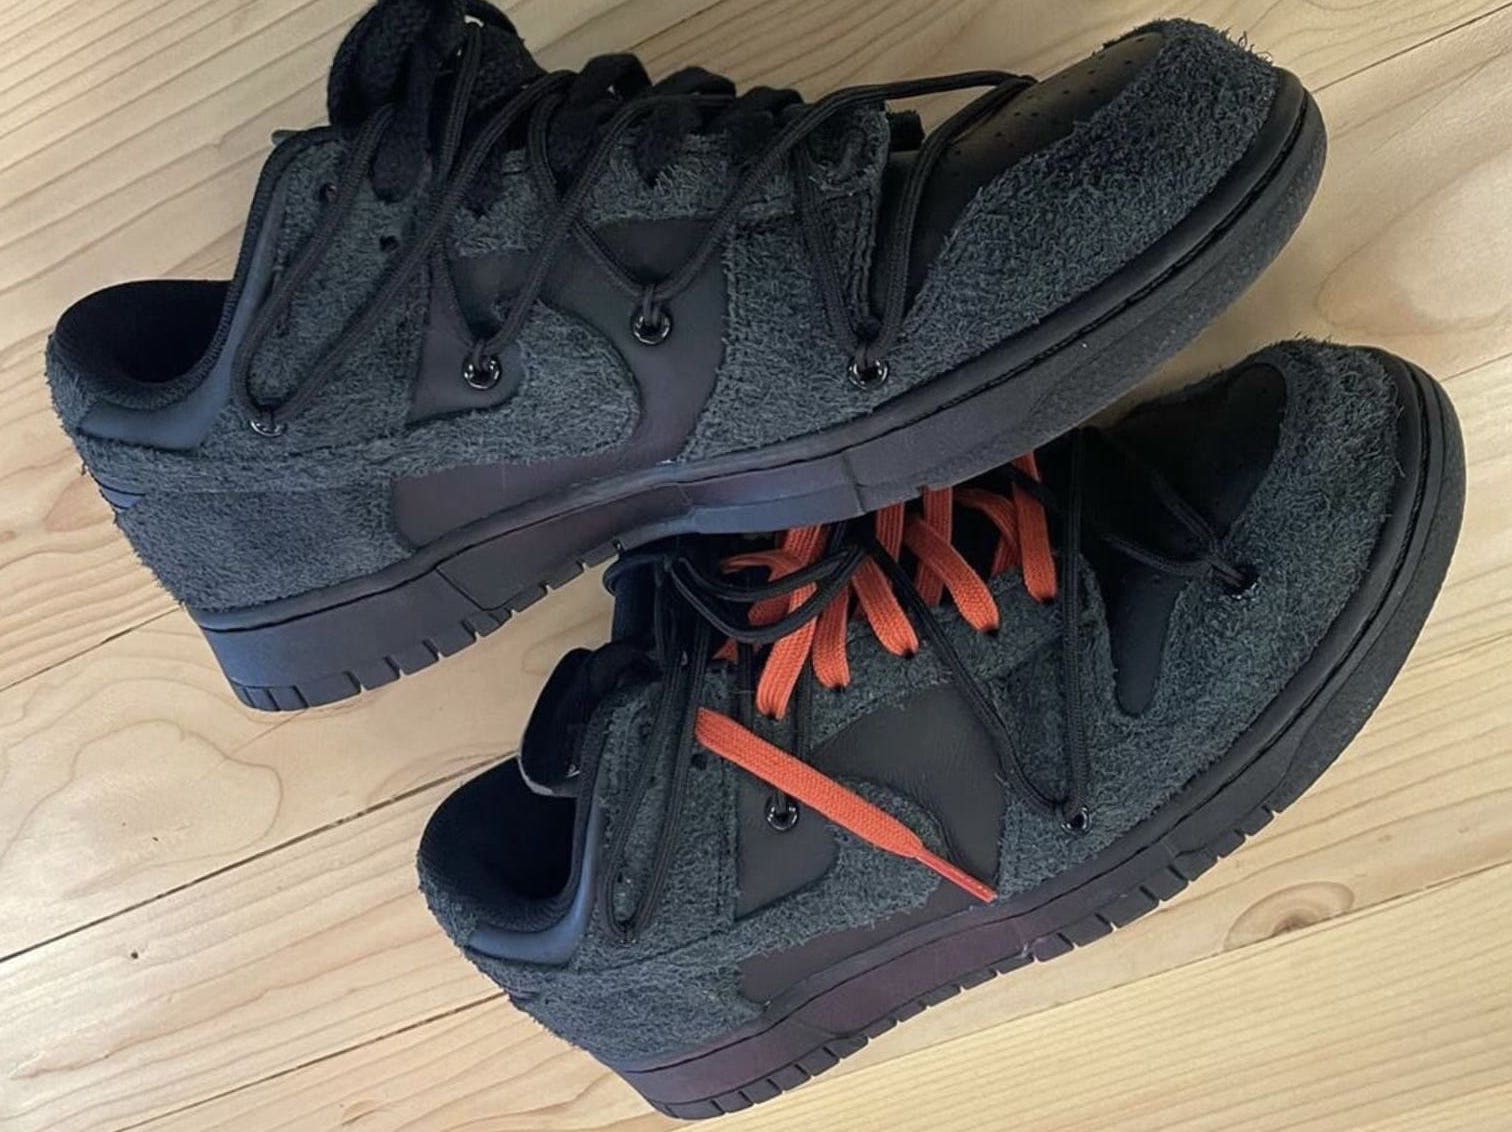 Off-White Nike Dunk Low Black 2021 Release Date - SBD